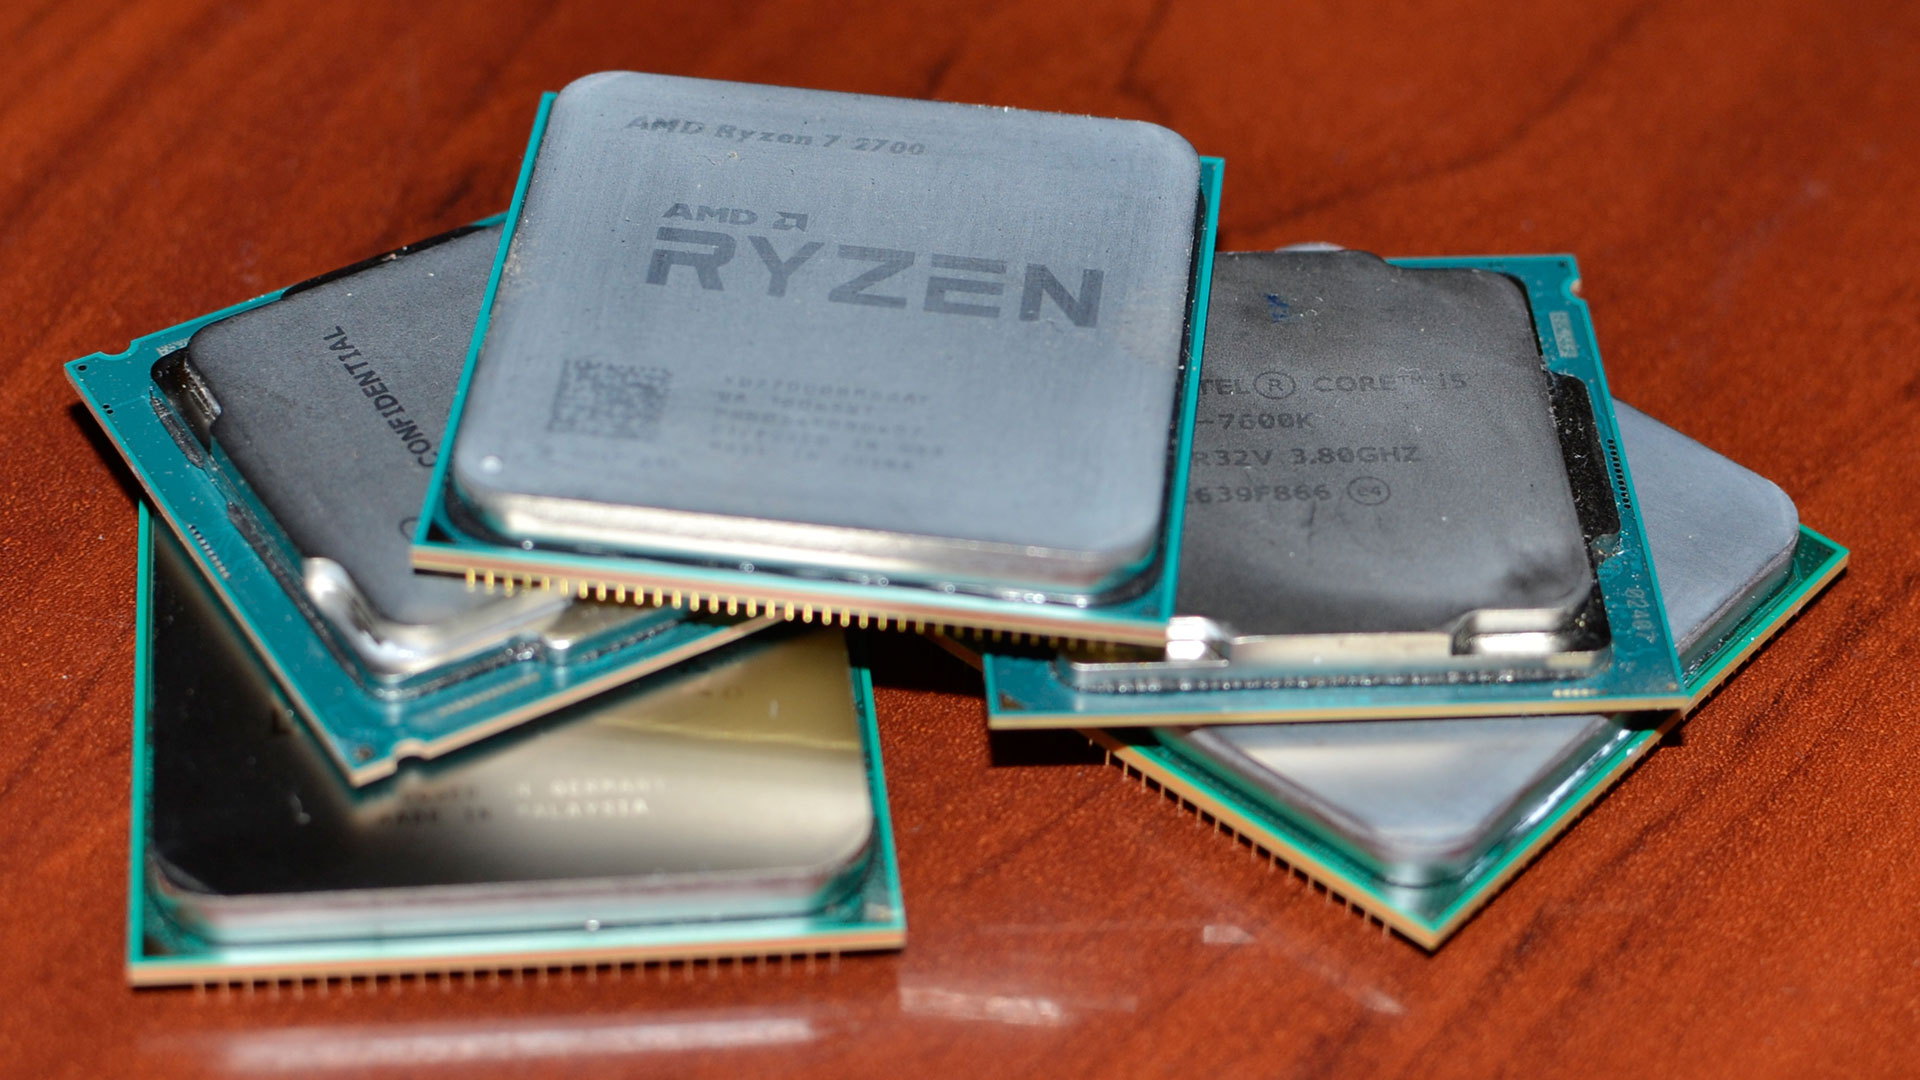 AMD vs Intel CPUs: who makes the better CPU?